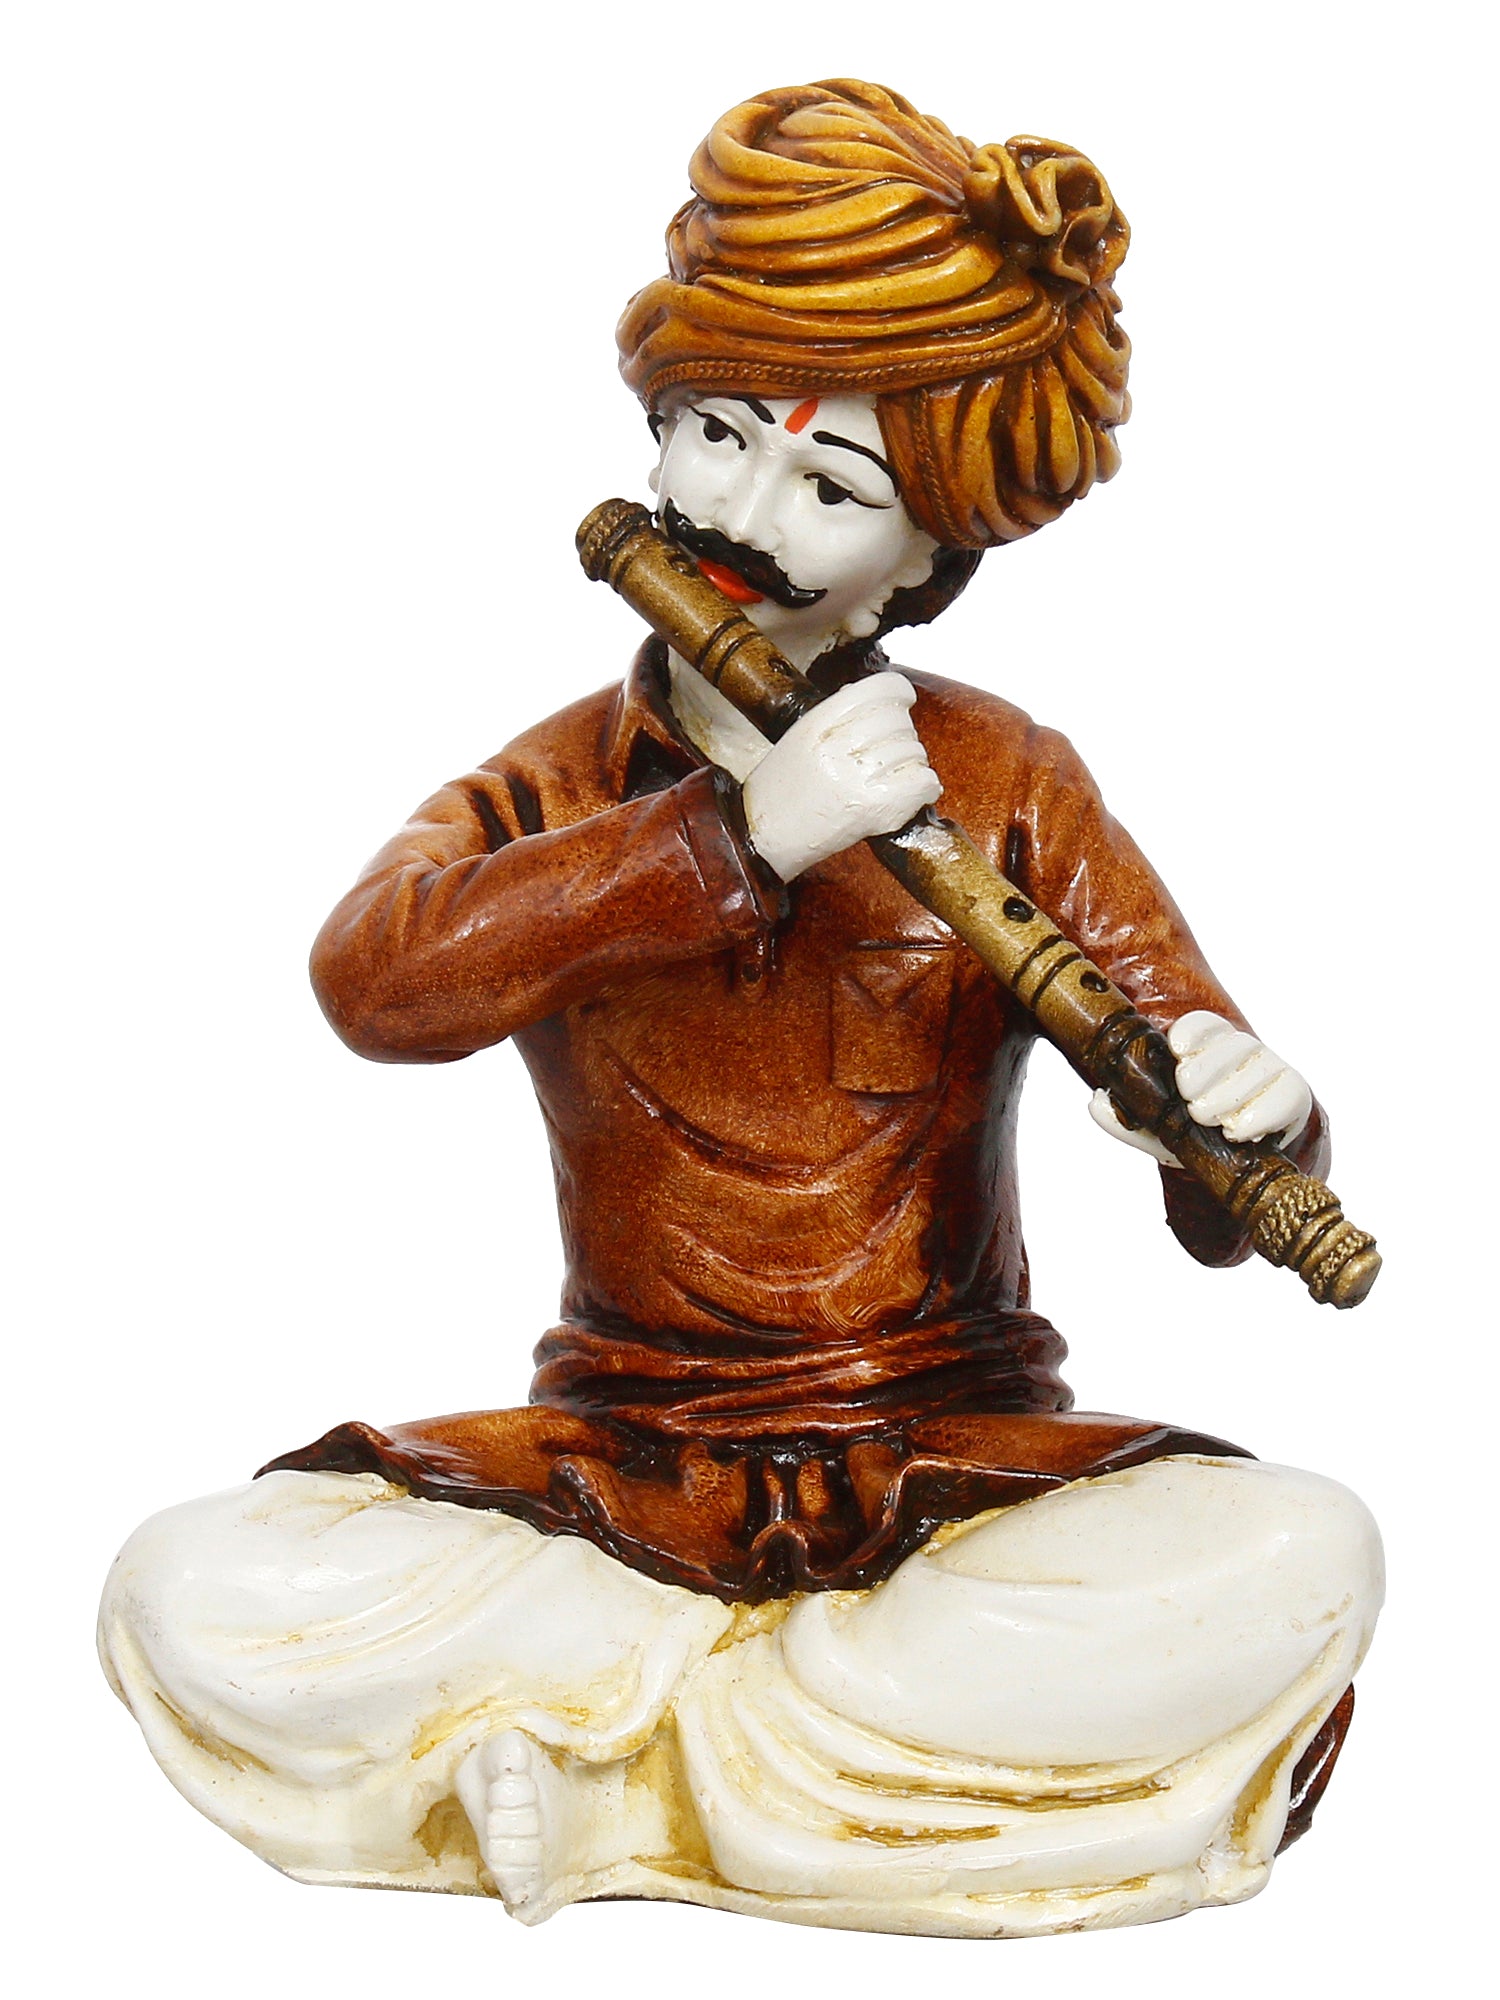 Polyresin Rajasthani Musician Men Statue Playing Flute Human Figurines Home Decor Showpiece 2